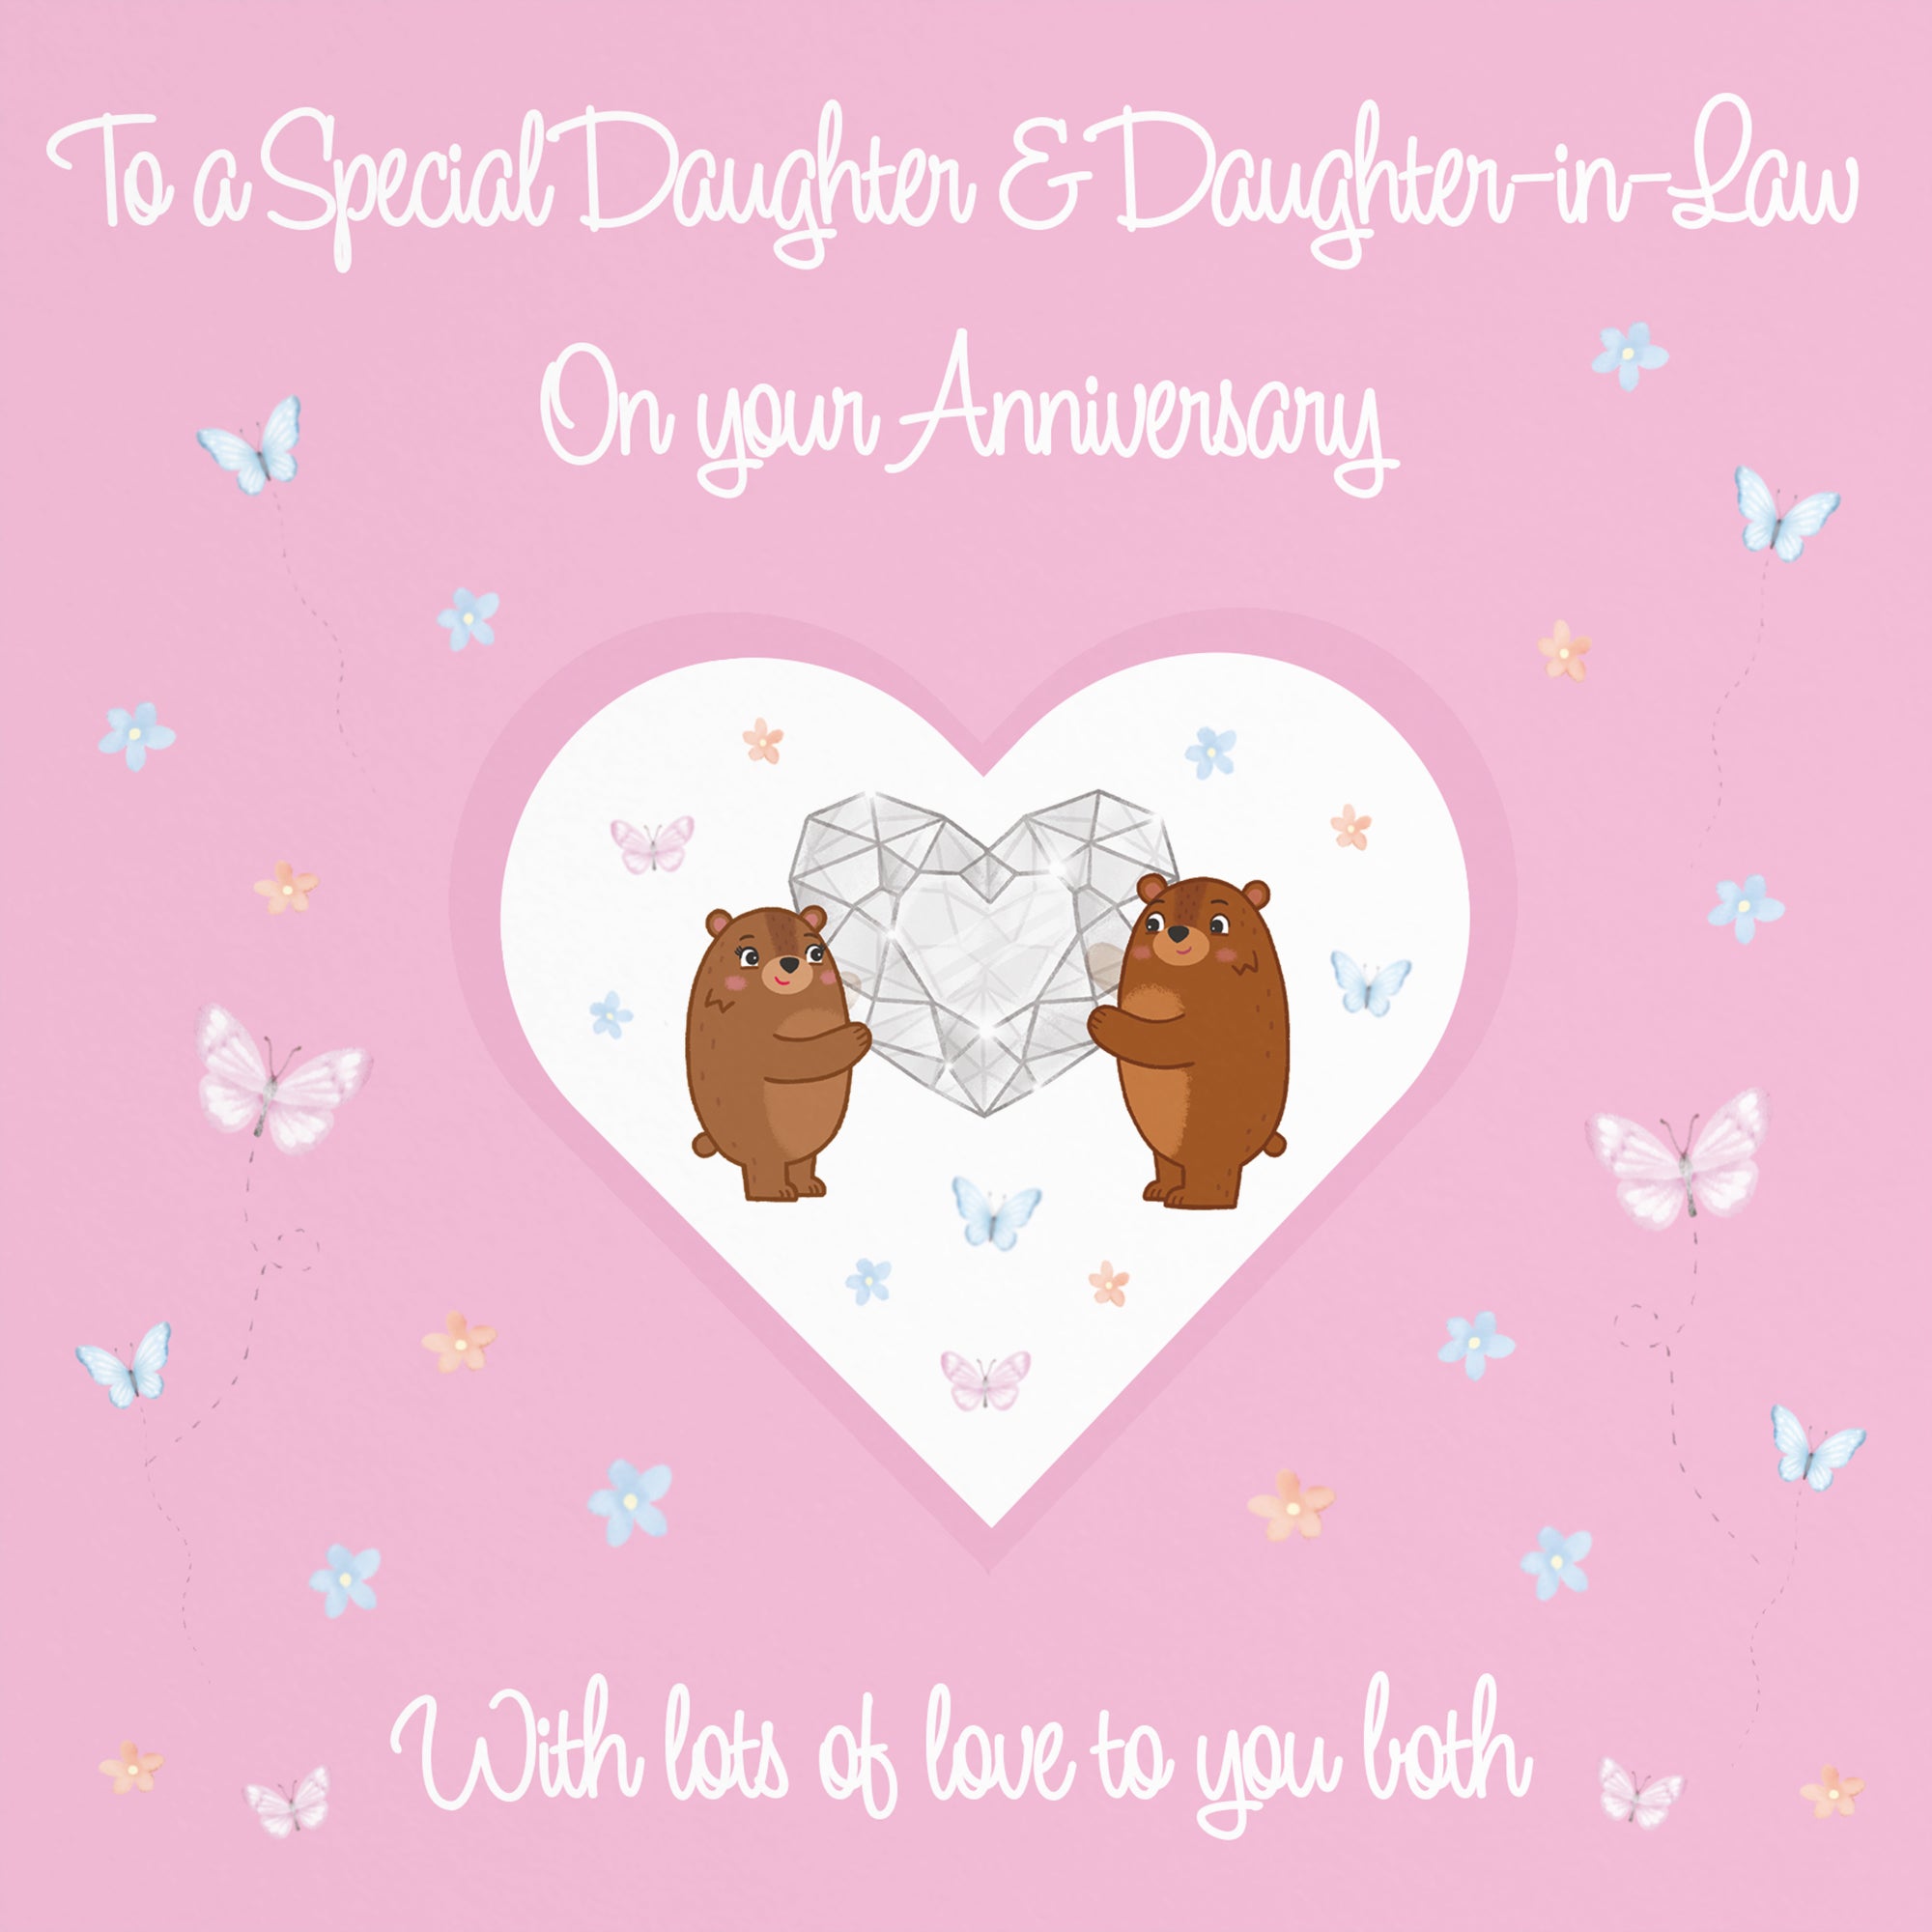 Daughter And Daughter-in-Law Anniversary Card Romantic Meadows